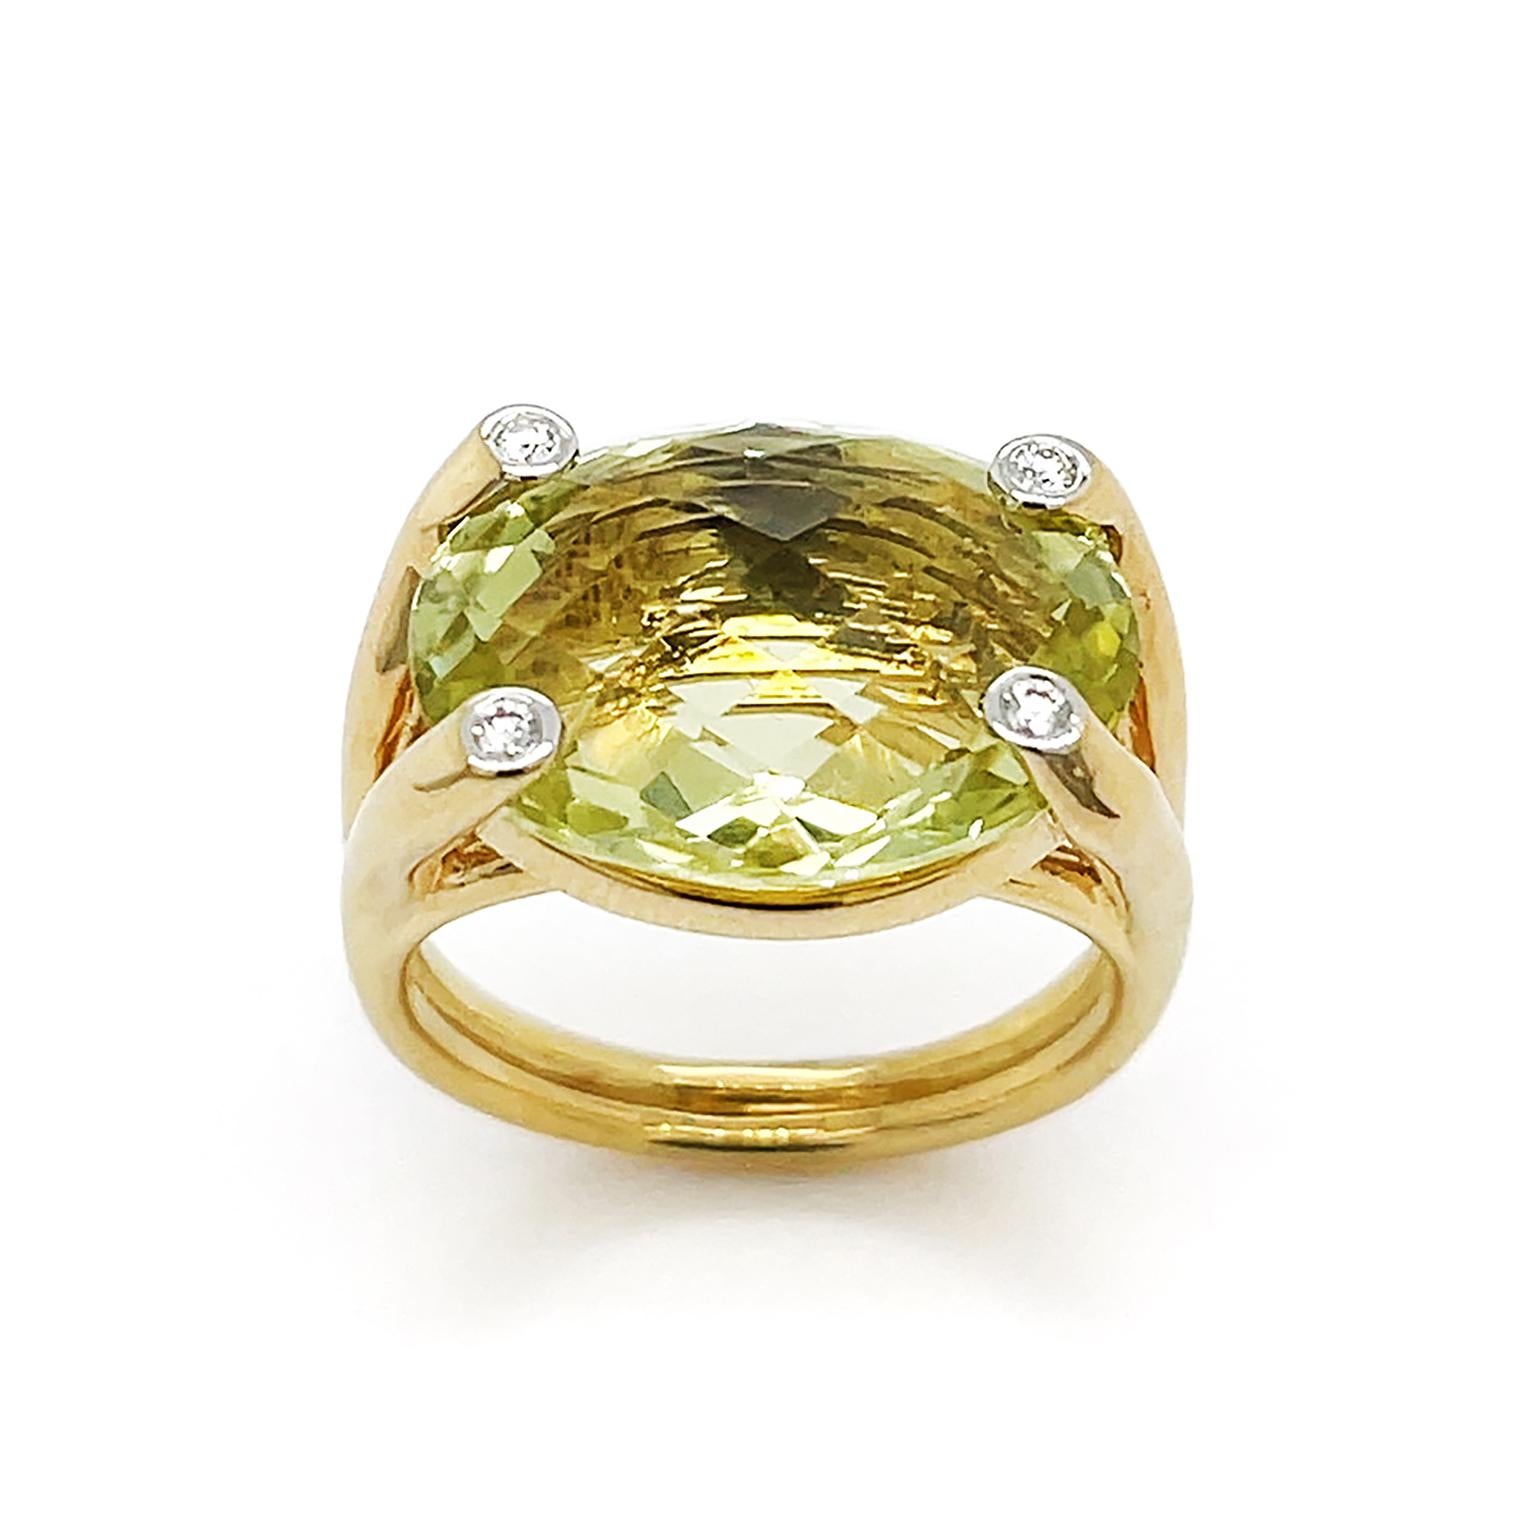 Candy-like green amethyst is the main showpiece. An oval and checkerboard cut gemstone showcases a scintillating range of yellow-green hues from within. 18k yellow gold prongs graced with a single brilliant cut diamond on their tips give further